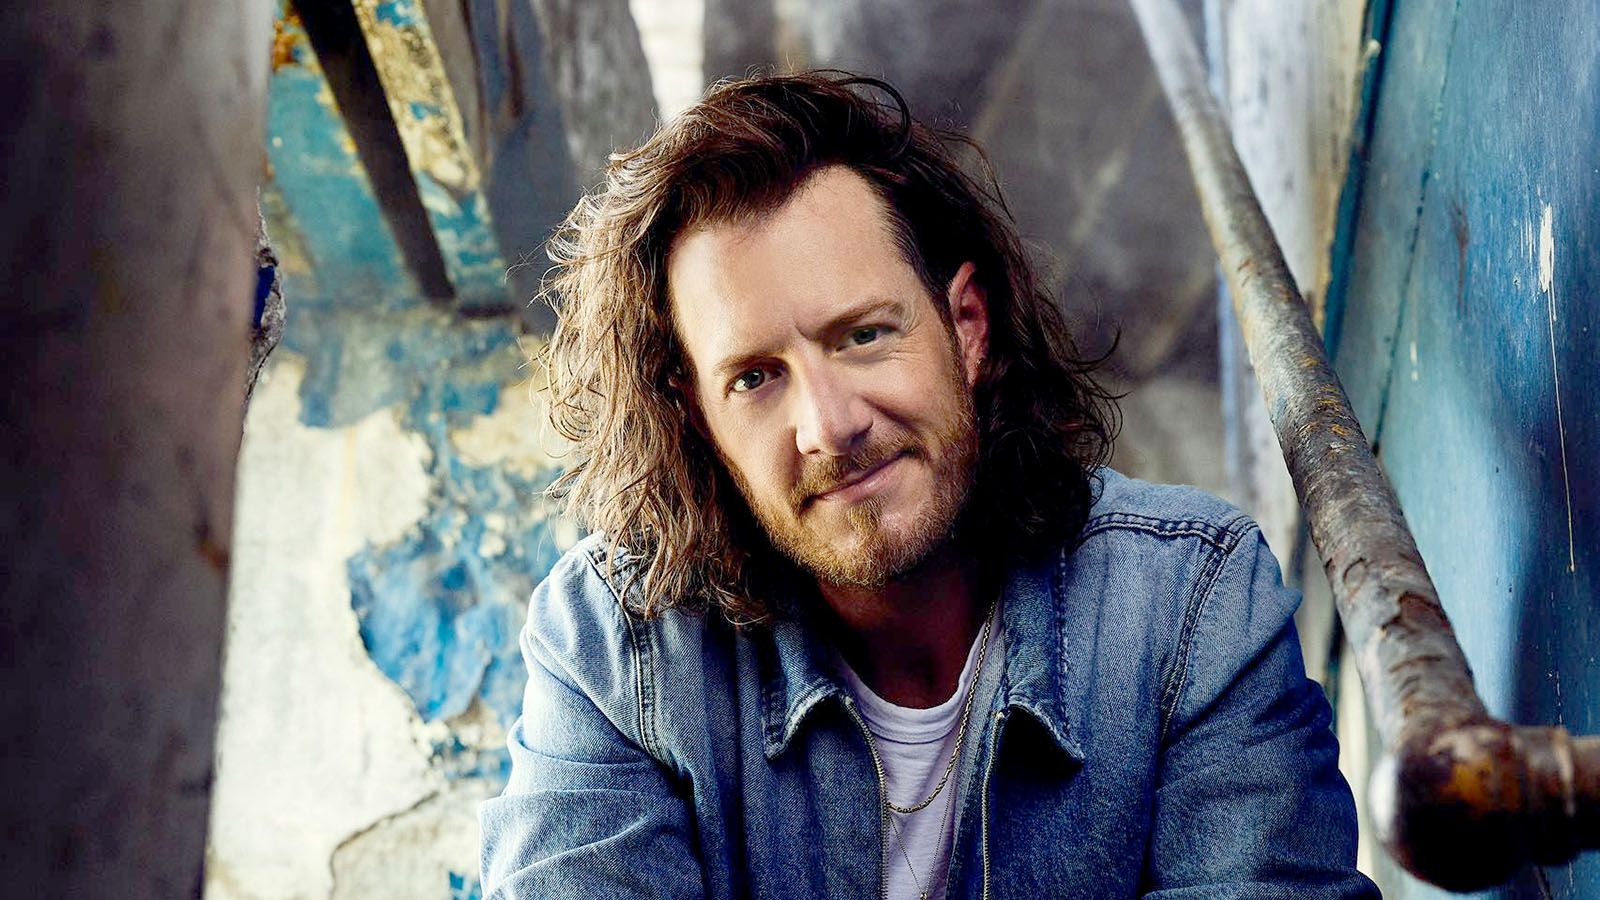 Tyler Hubbard will be at The Clyde Theatre on Thursday, Feb. 8.